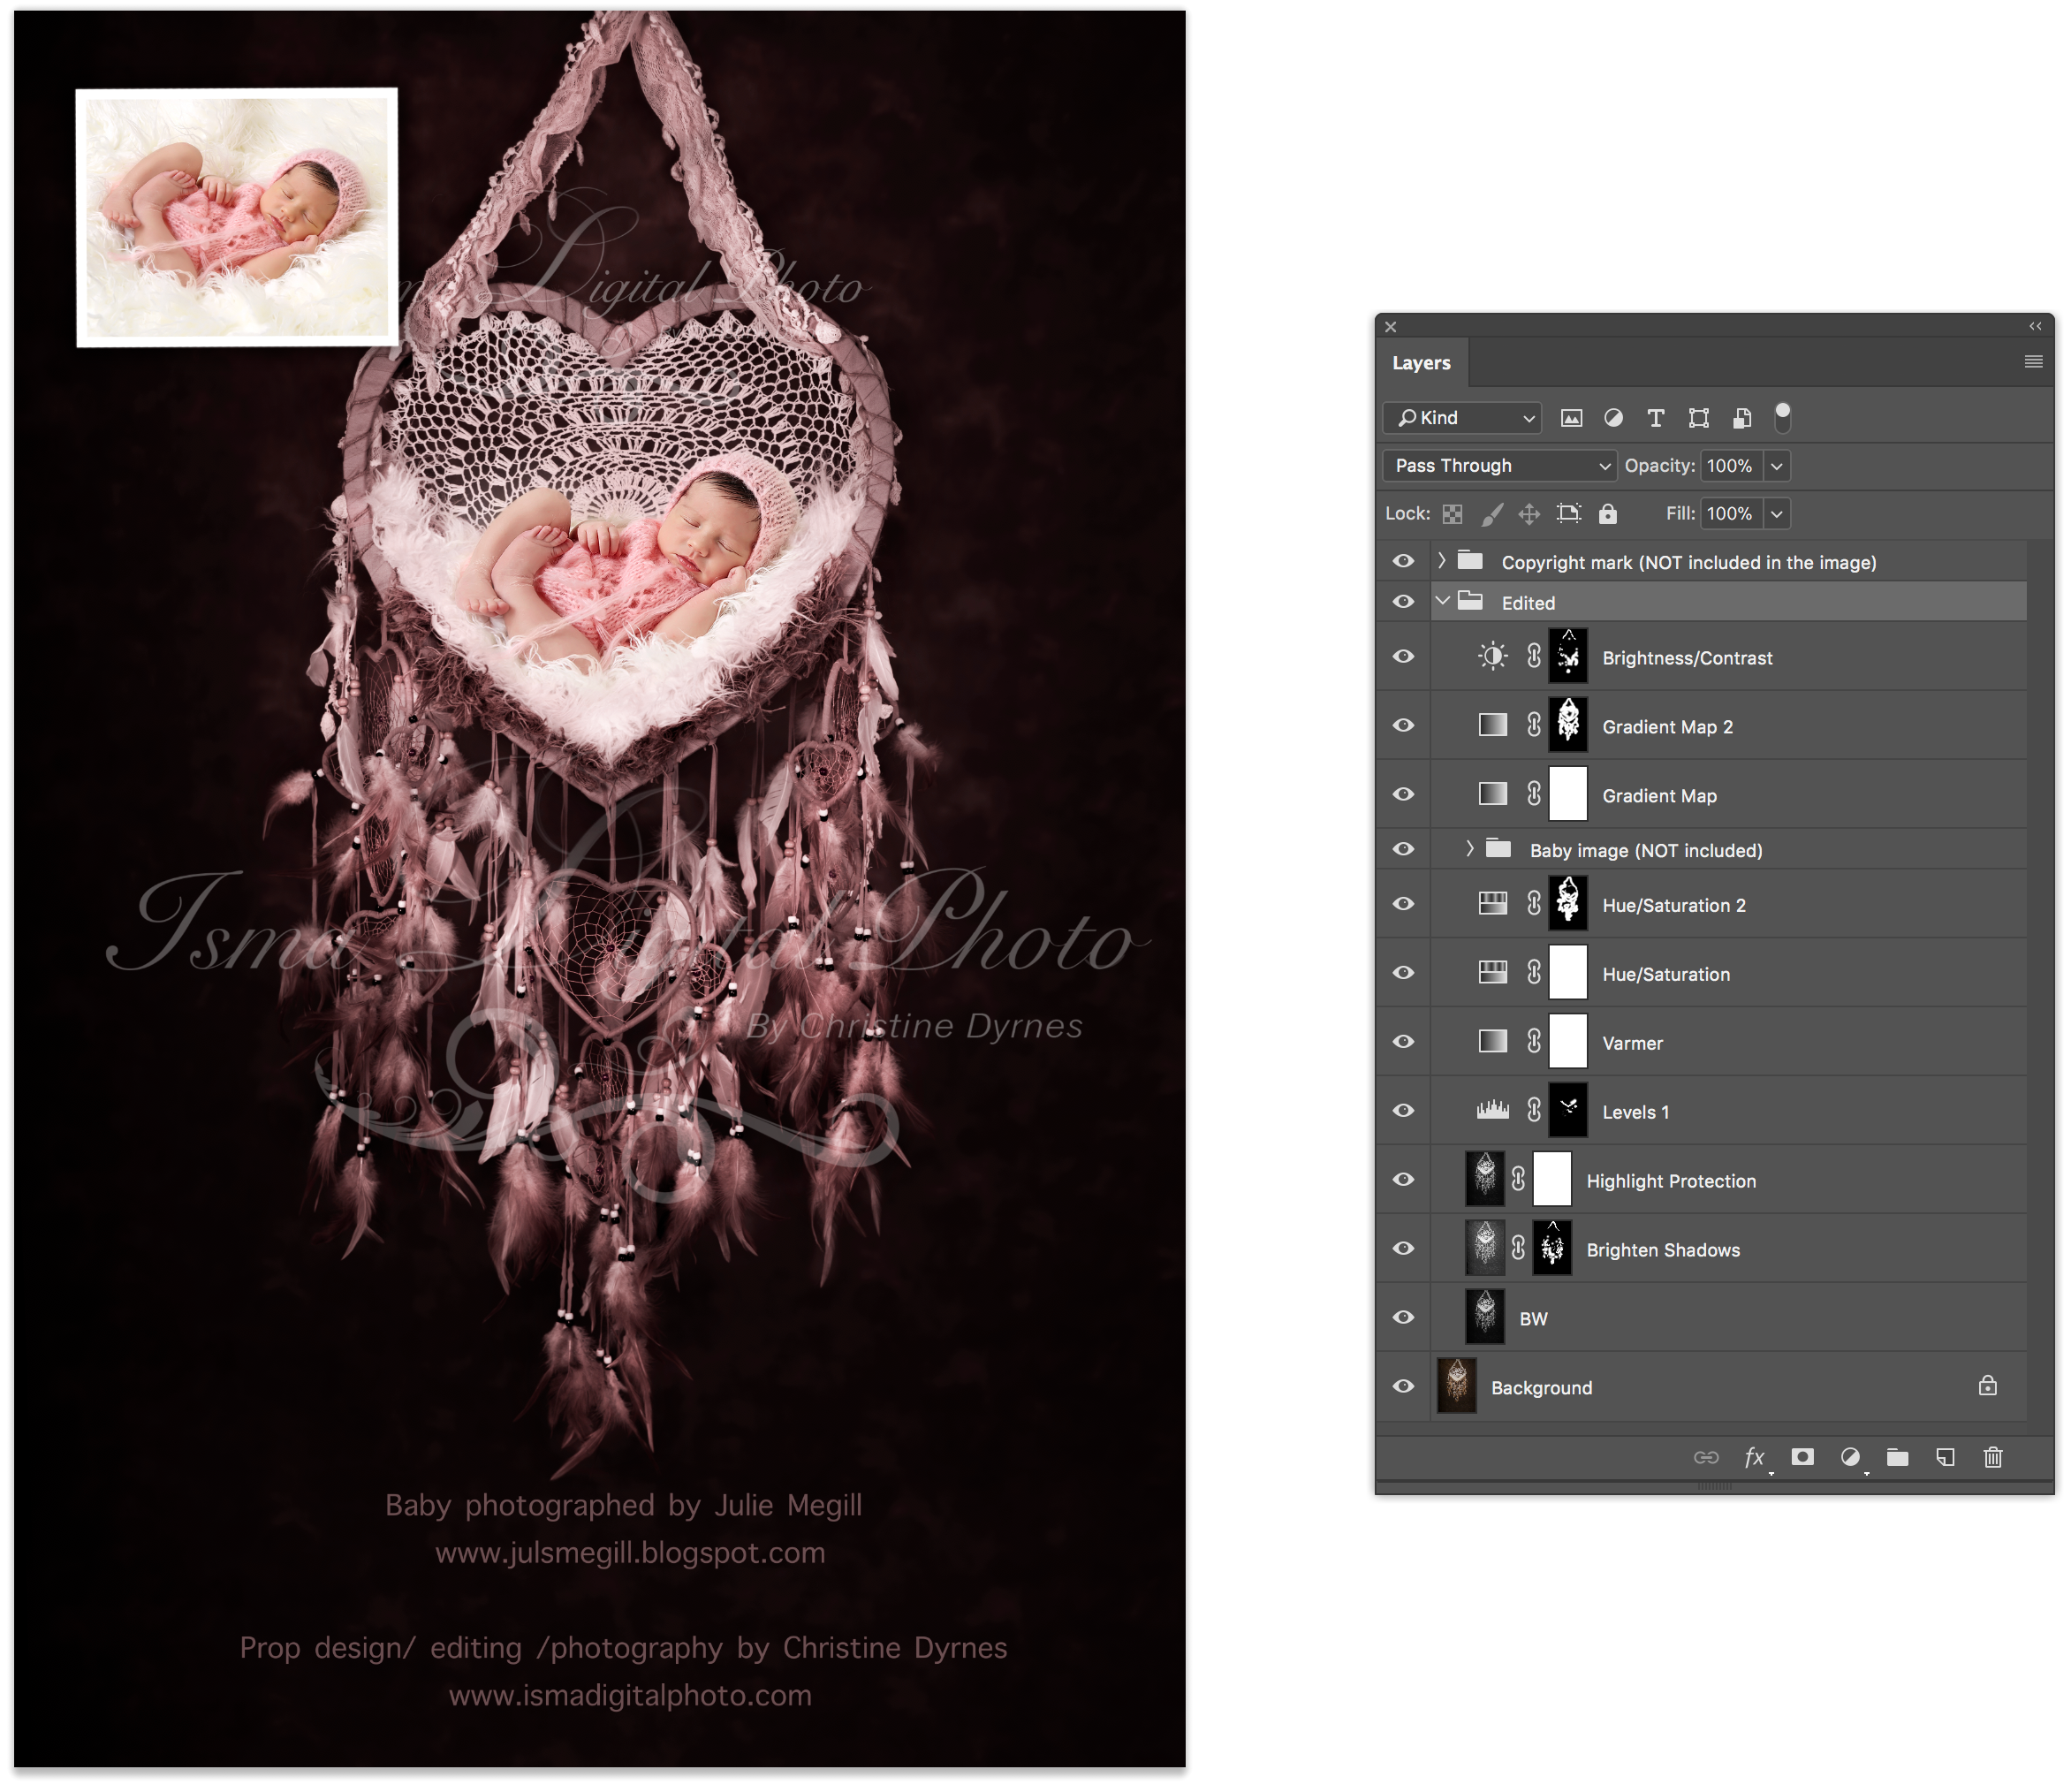 Digital Photography Backdrop /Props for Newborn Photography - High resolution digital backdrop - One JPG and one PSD file with layers 